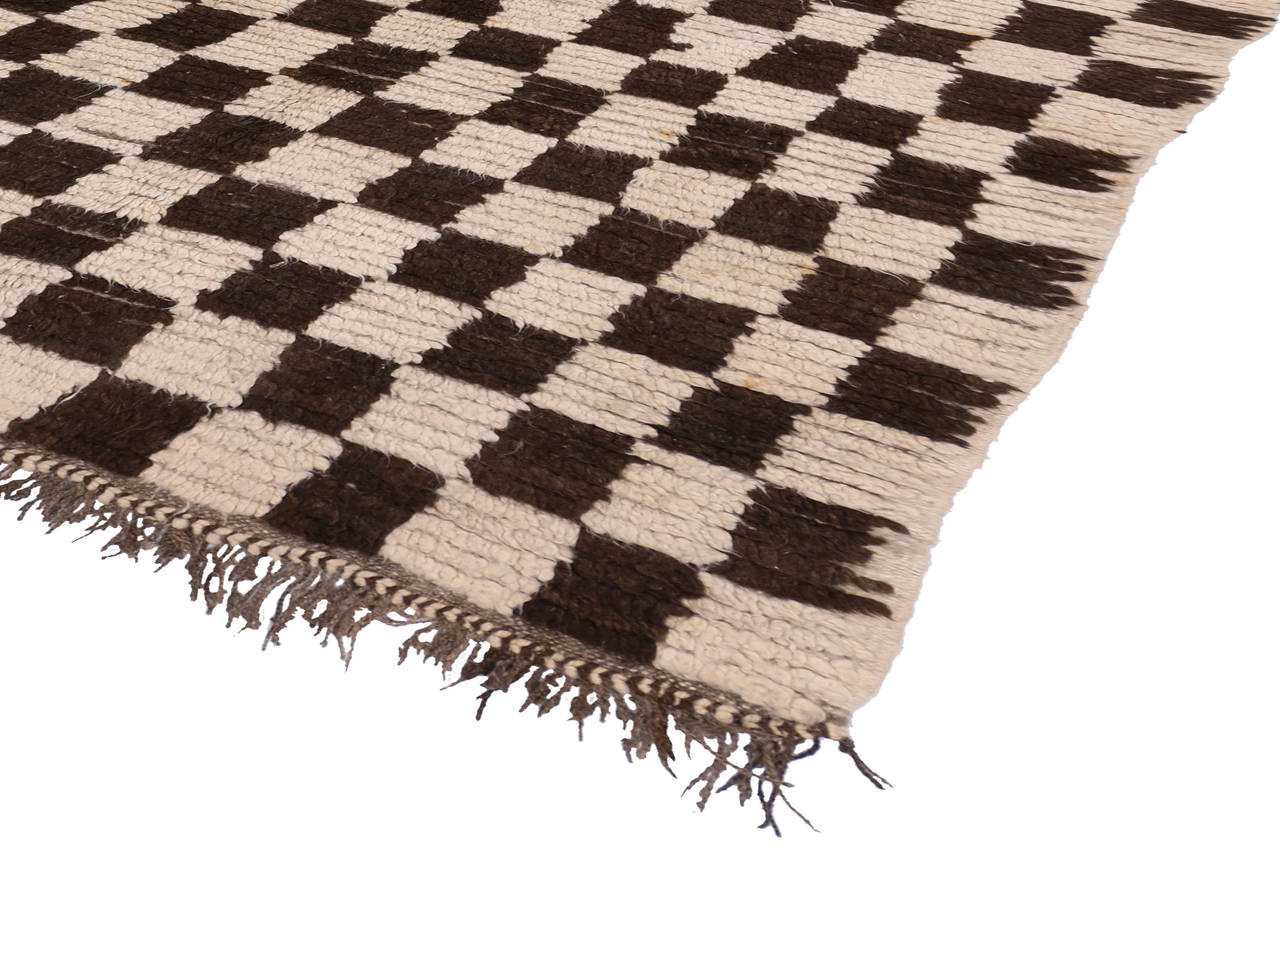 Mid-Century Modern Vintage Berber Moroccan Rug with Retro Checkerboard Design and Cubism Style